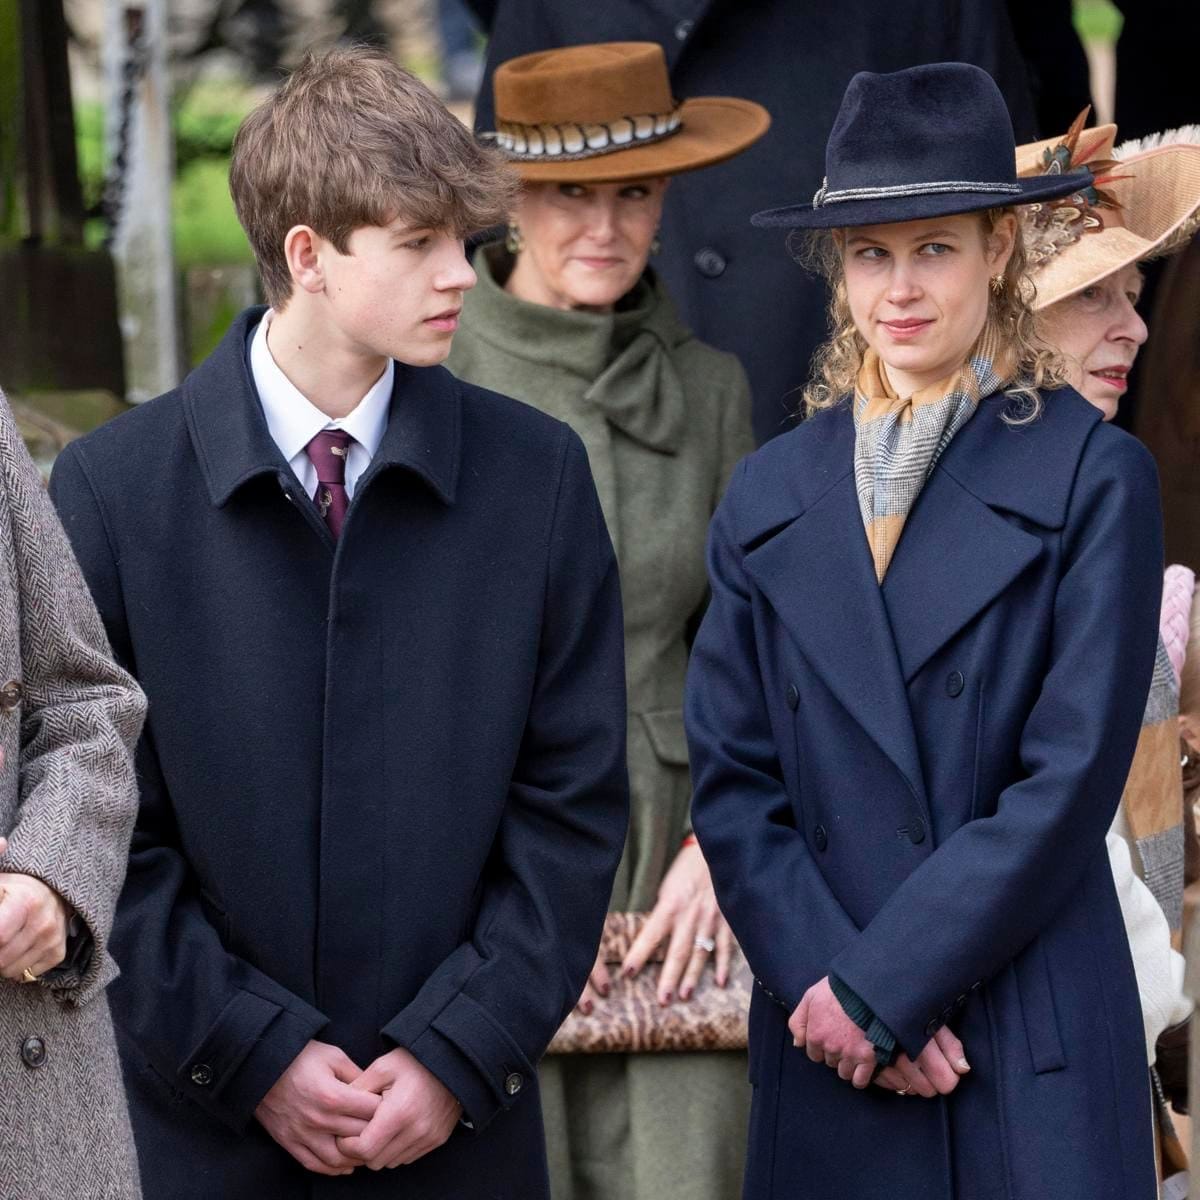 Prince Edward and Sophie's kids, James, Earl of Wessex and Lady Louise Windsor.